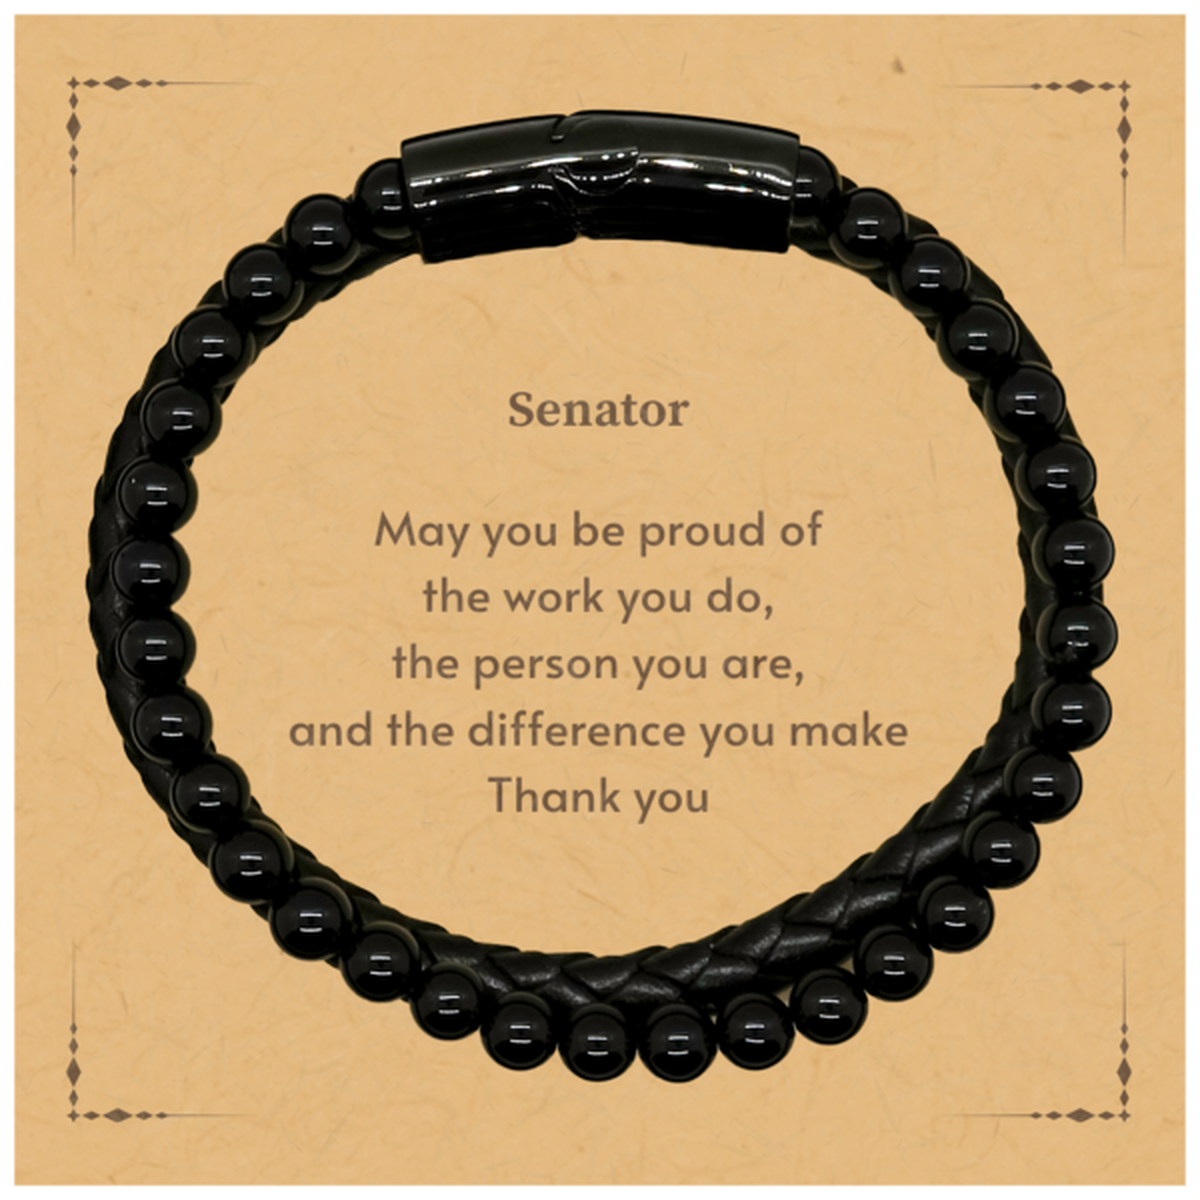 Heartwarming Stone Leather Bracelets Retirement Coworkers Gifts for Senator, Senator May You be proud of the work you do, the person you are Gifts for Boss Men Women Friends